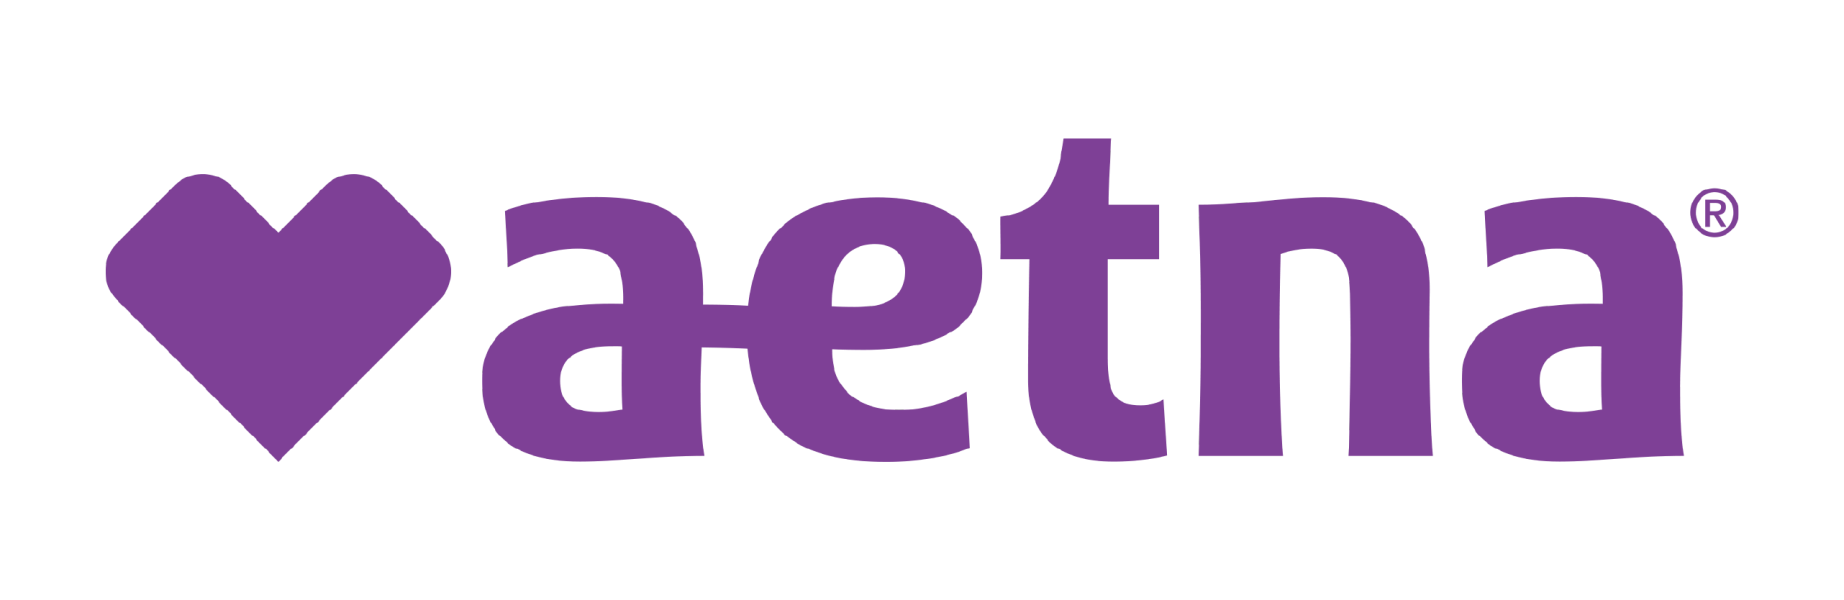 Visit Aetna's website by clicking the logo